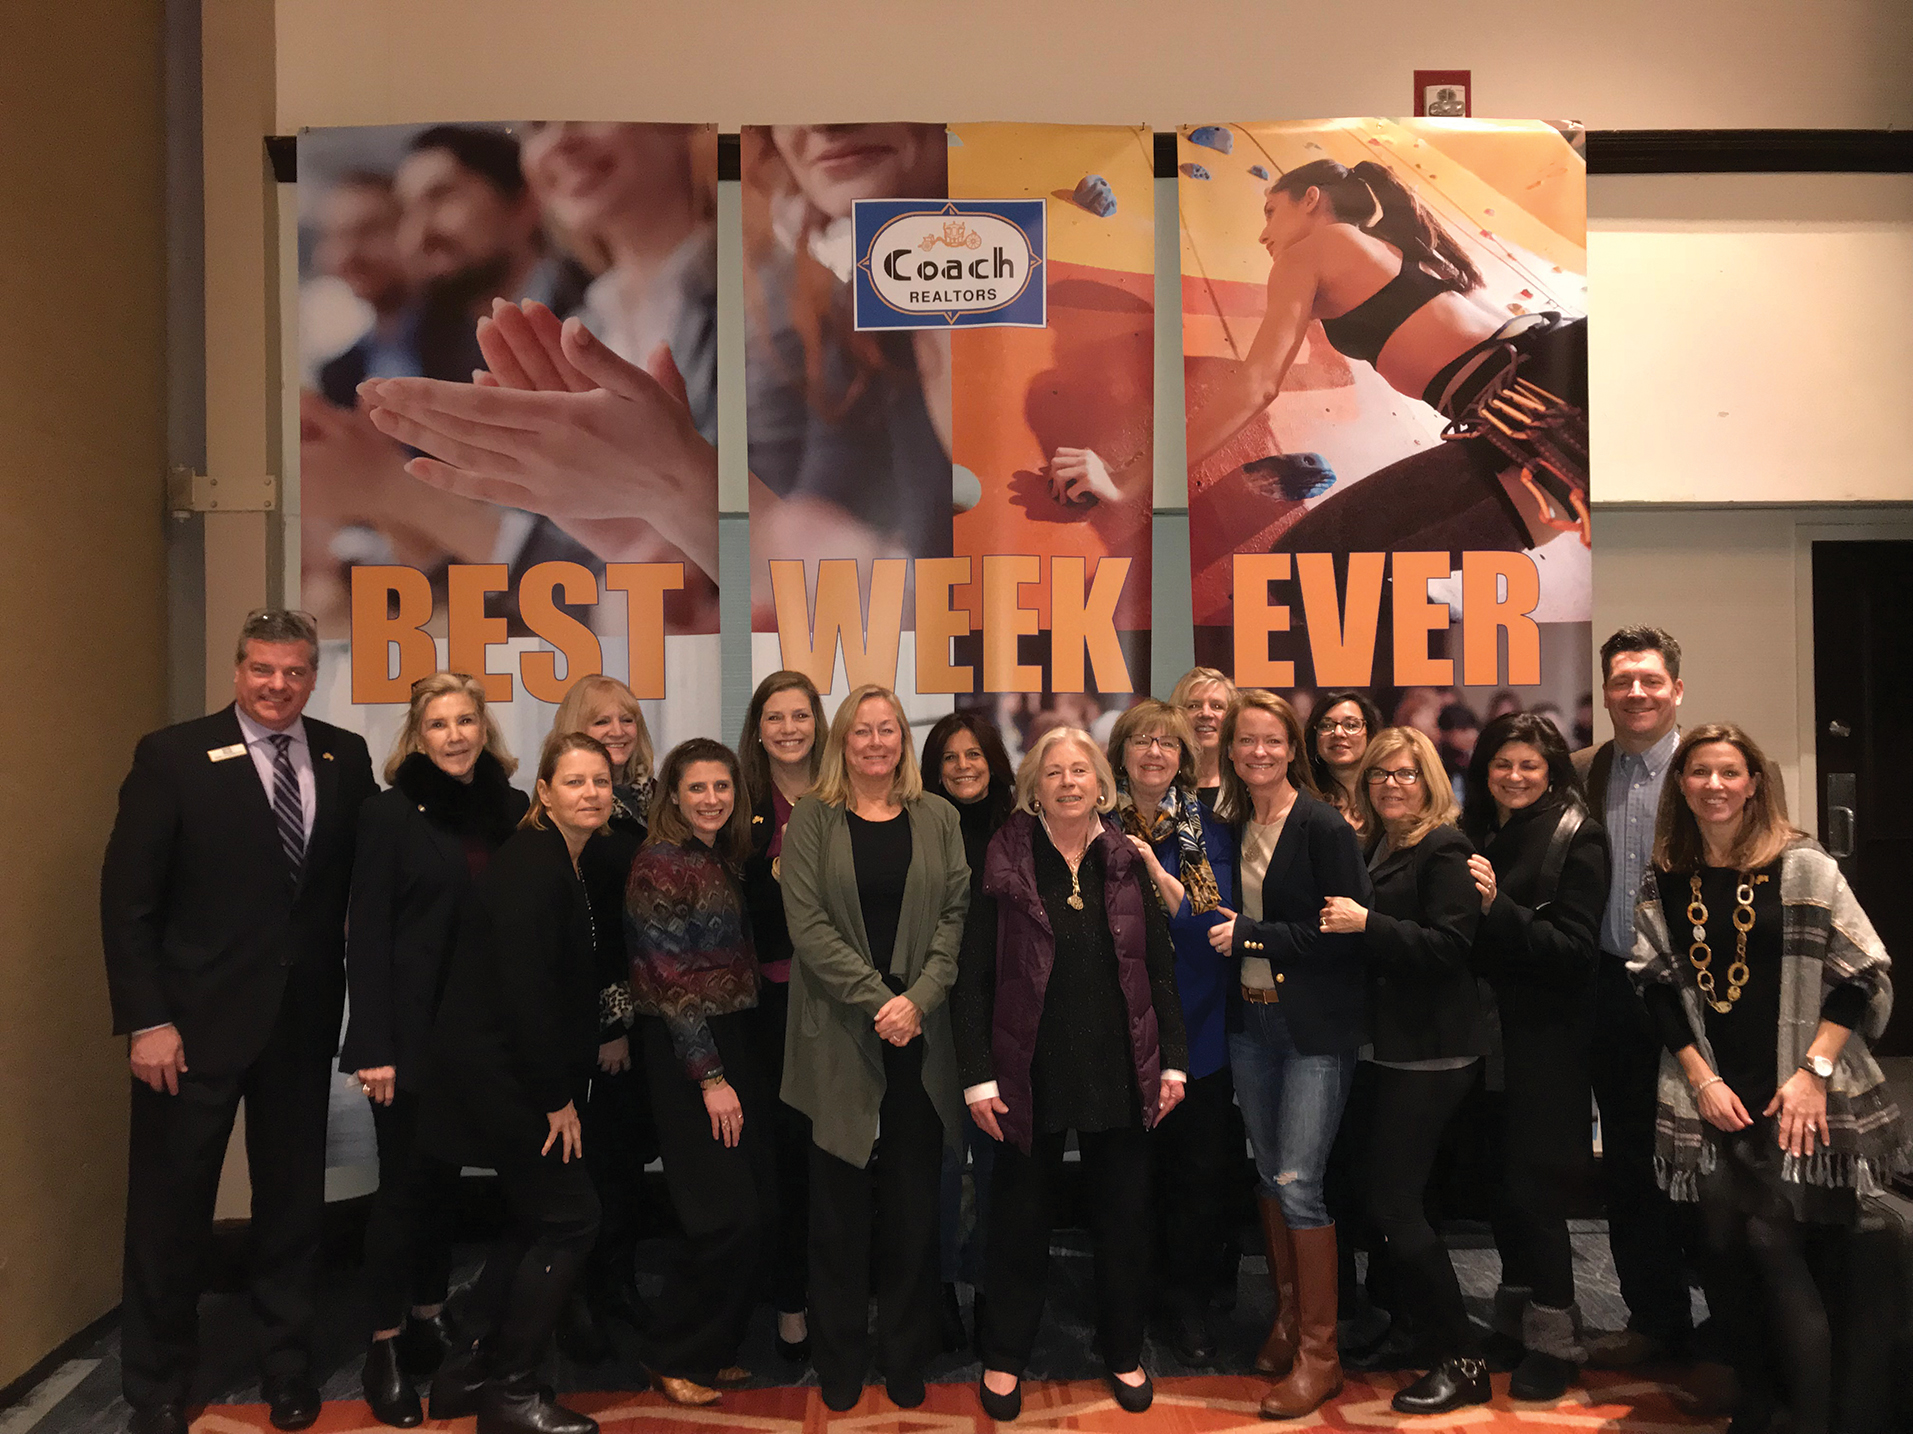 Coach agents showing support for The Best Week Ever (Feb. 2018)